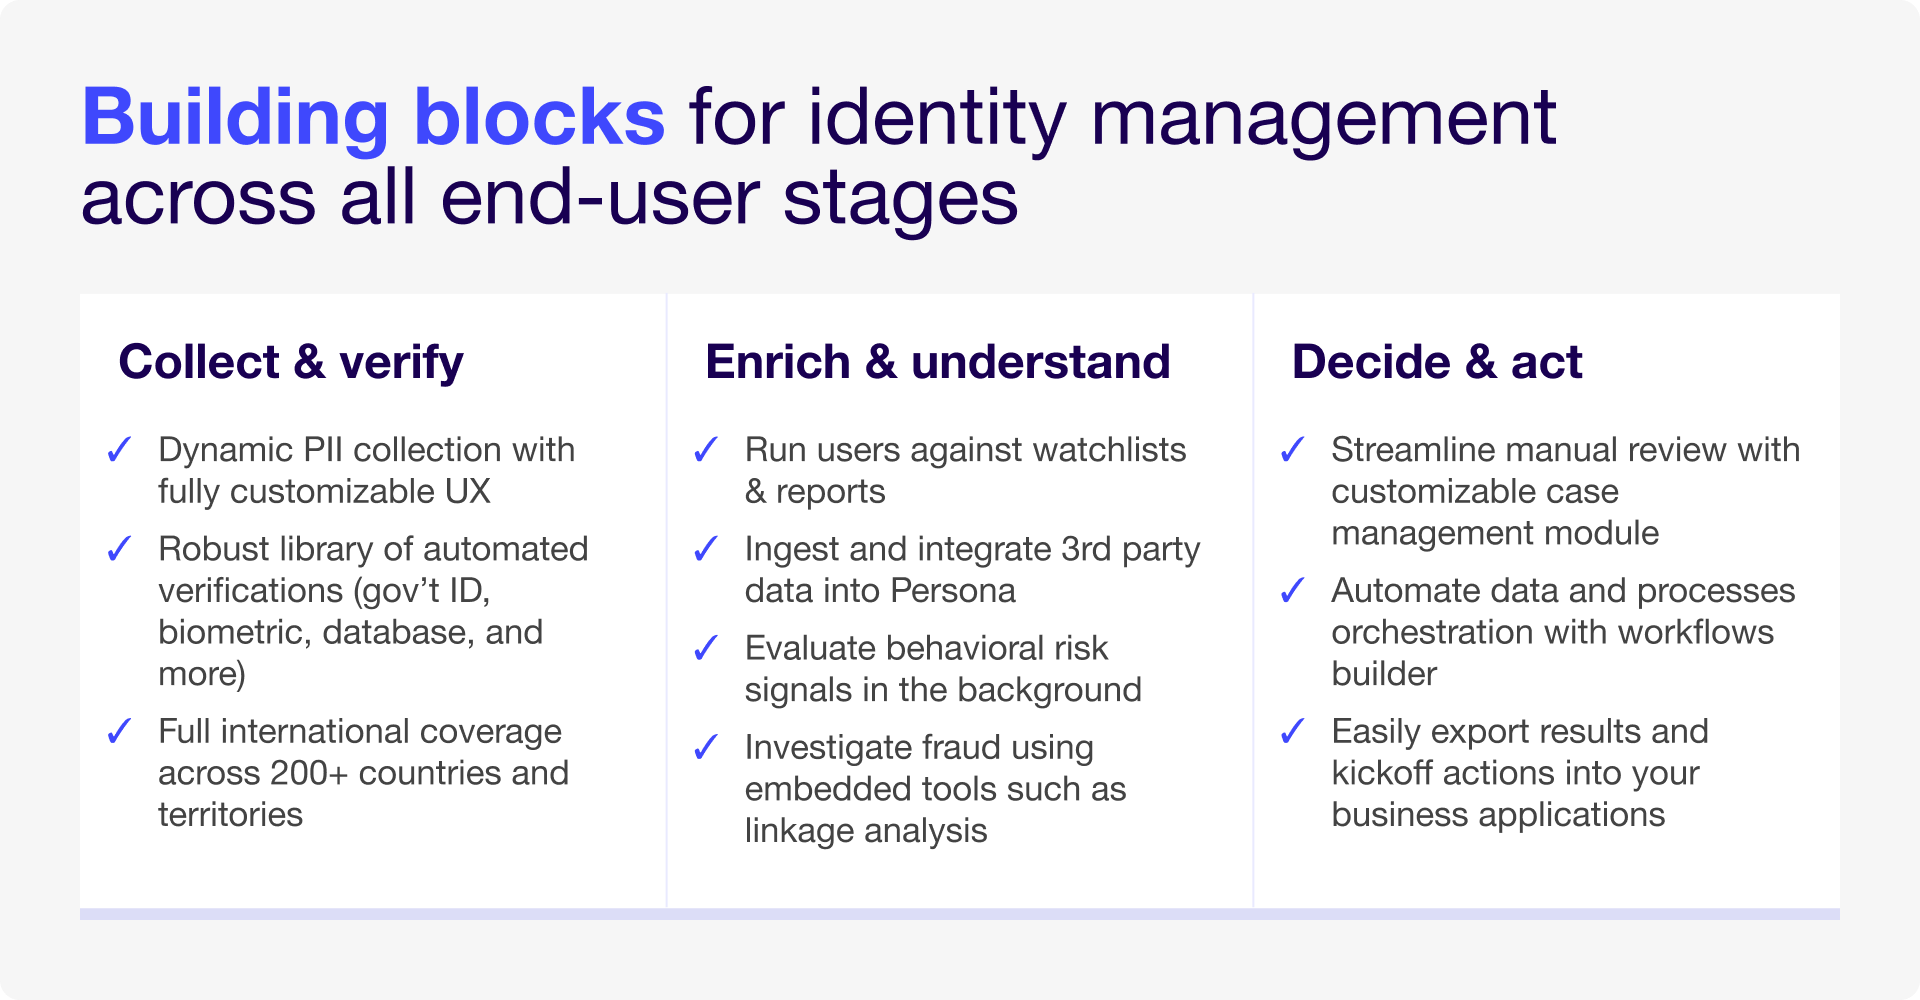 Building blocks for identity management across all end-user stages